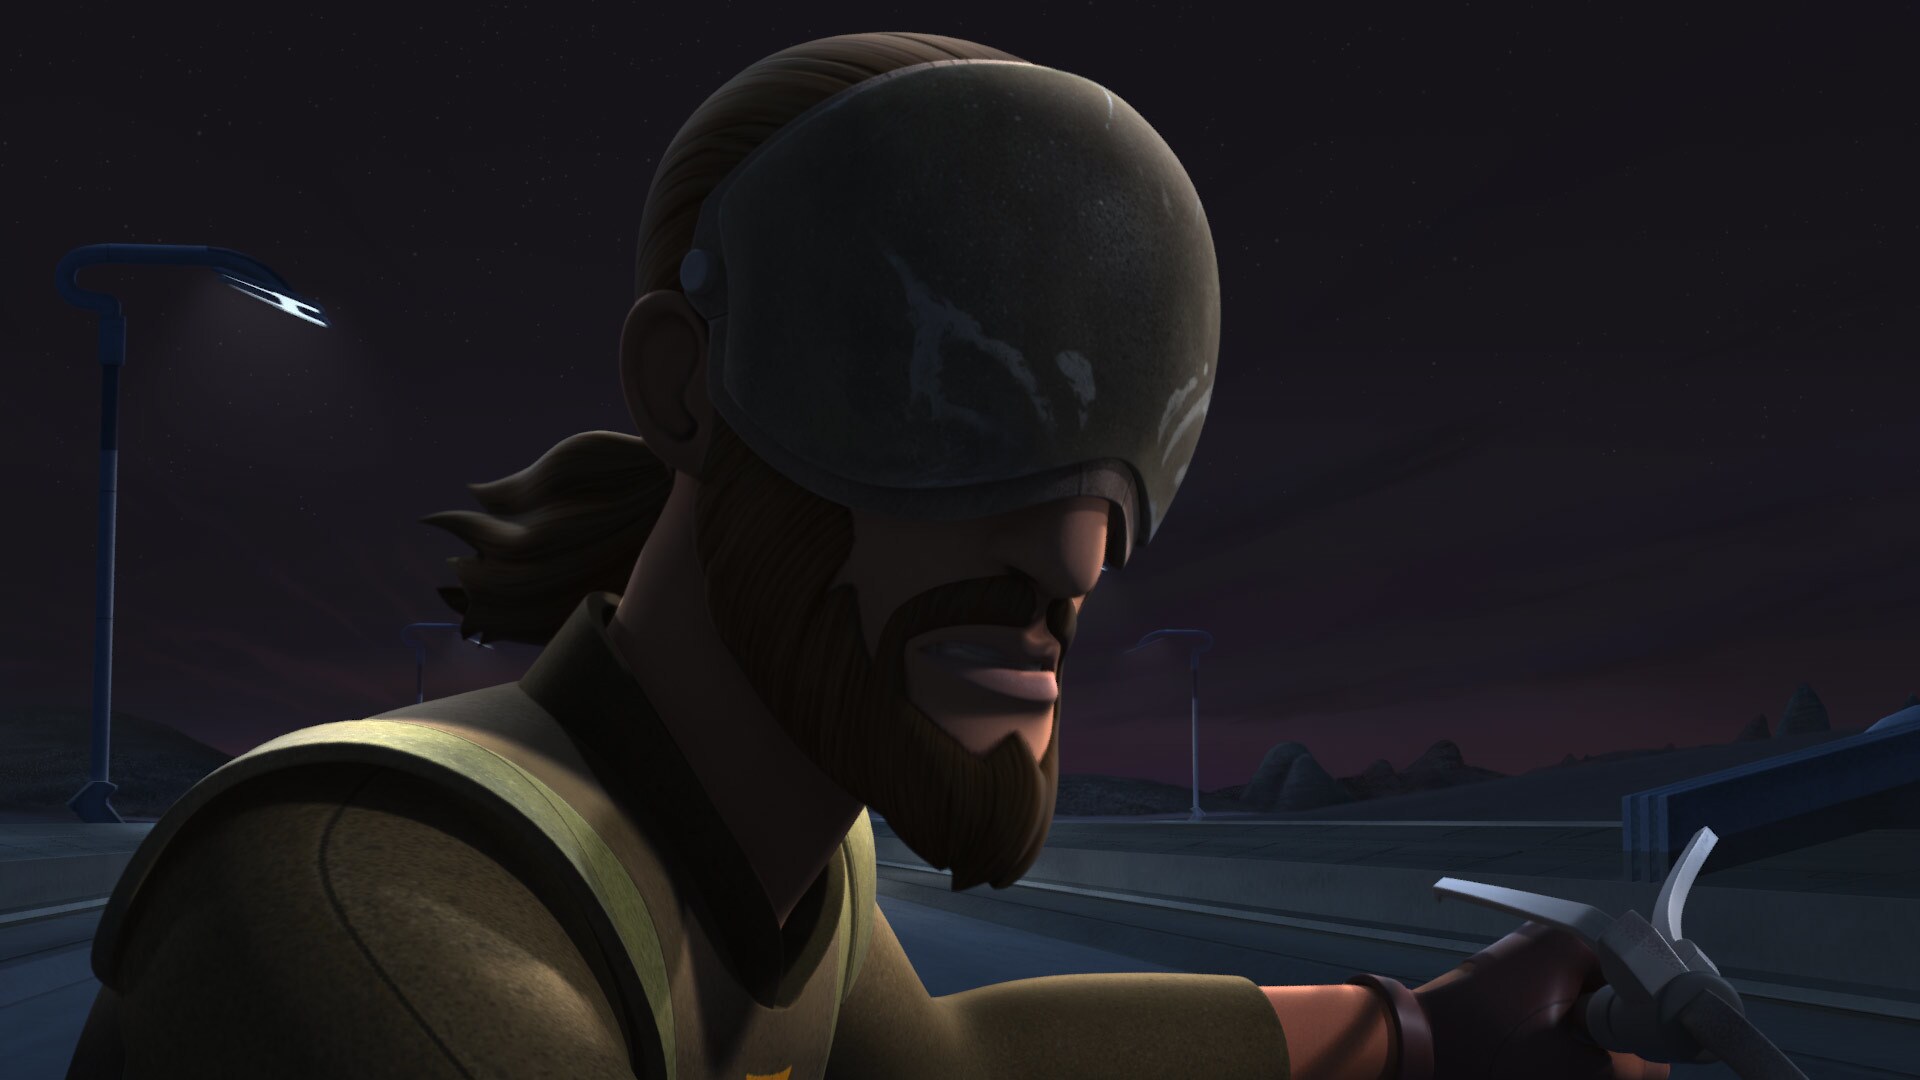 Kanan, having witnessed the crashes, is determined to find Hera. He leaves the Ghost crew to sear...